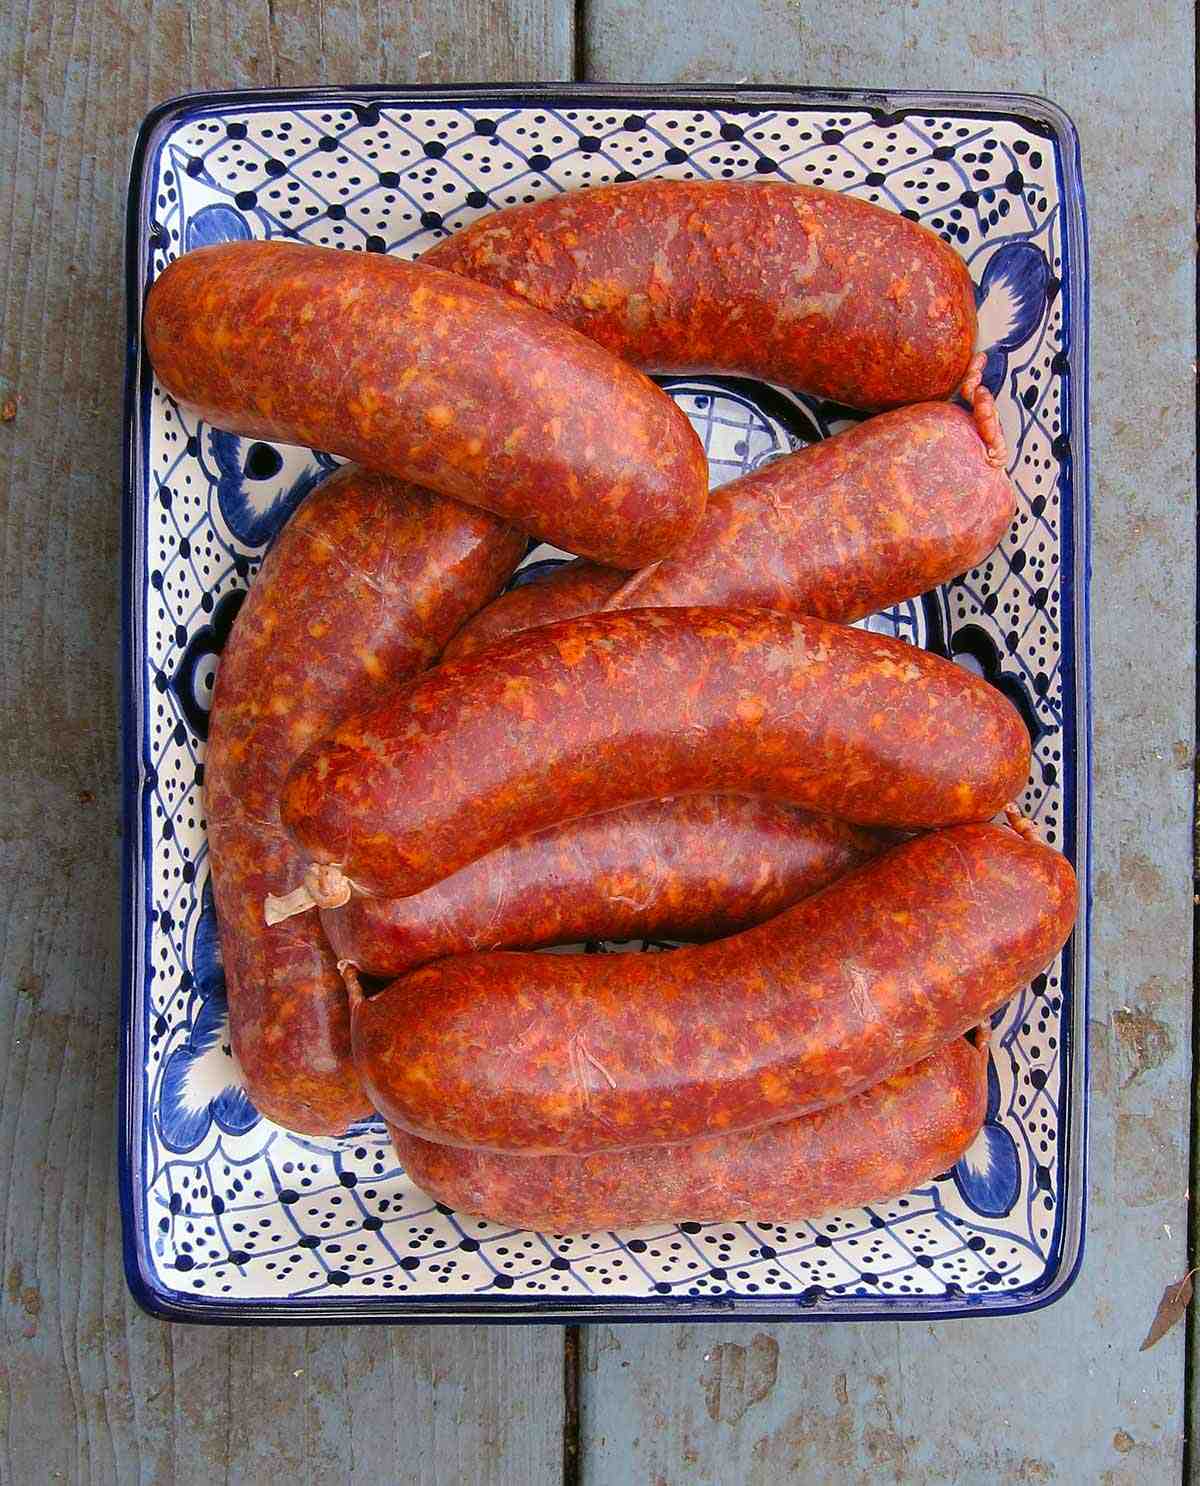 How do you drain grease from chorizo?